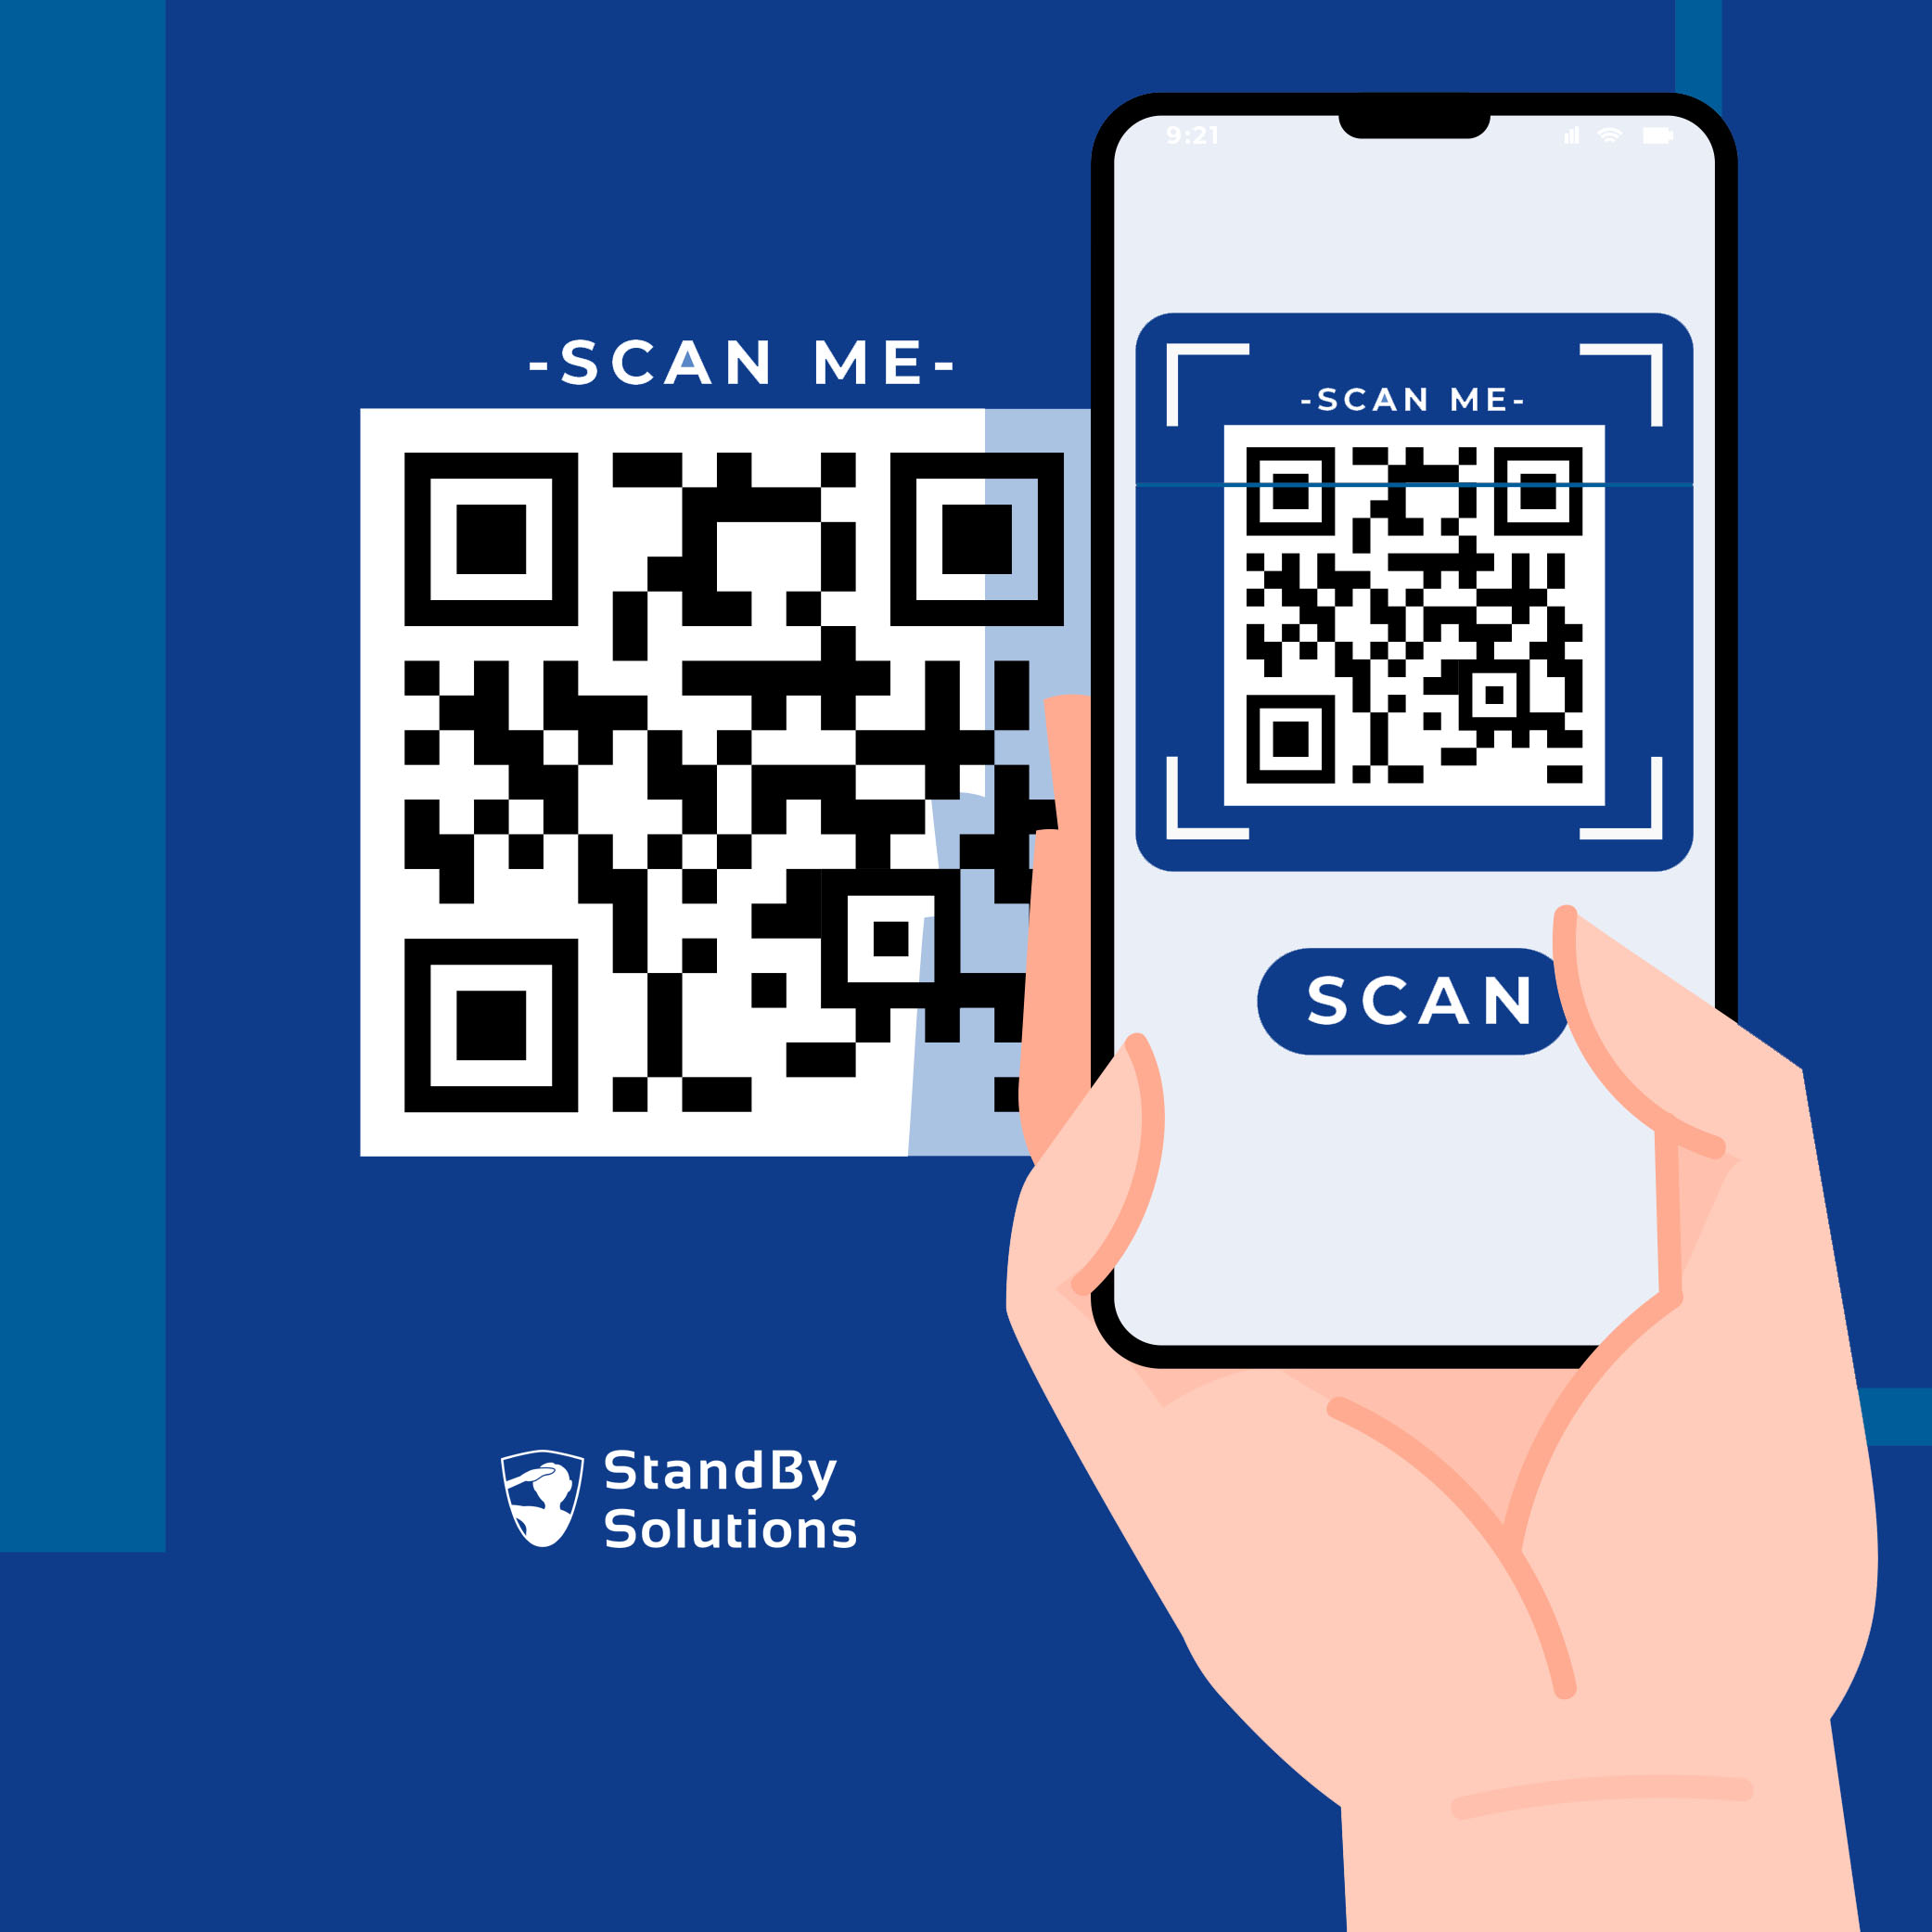 Alarming via QR code makes alarming easier for all employees. Act quickly in case of emergency and scan the QR now.